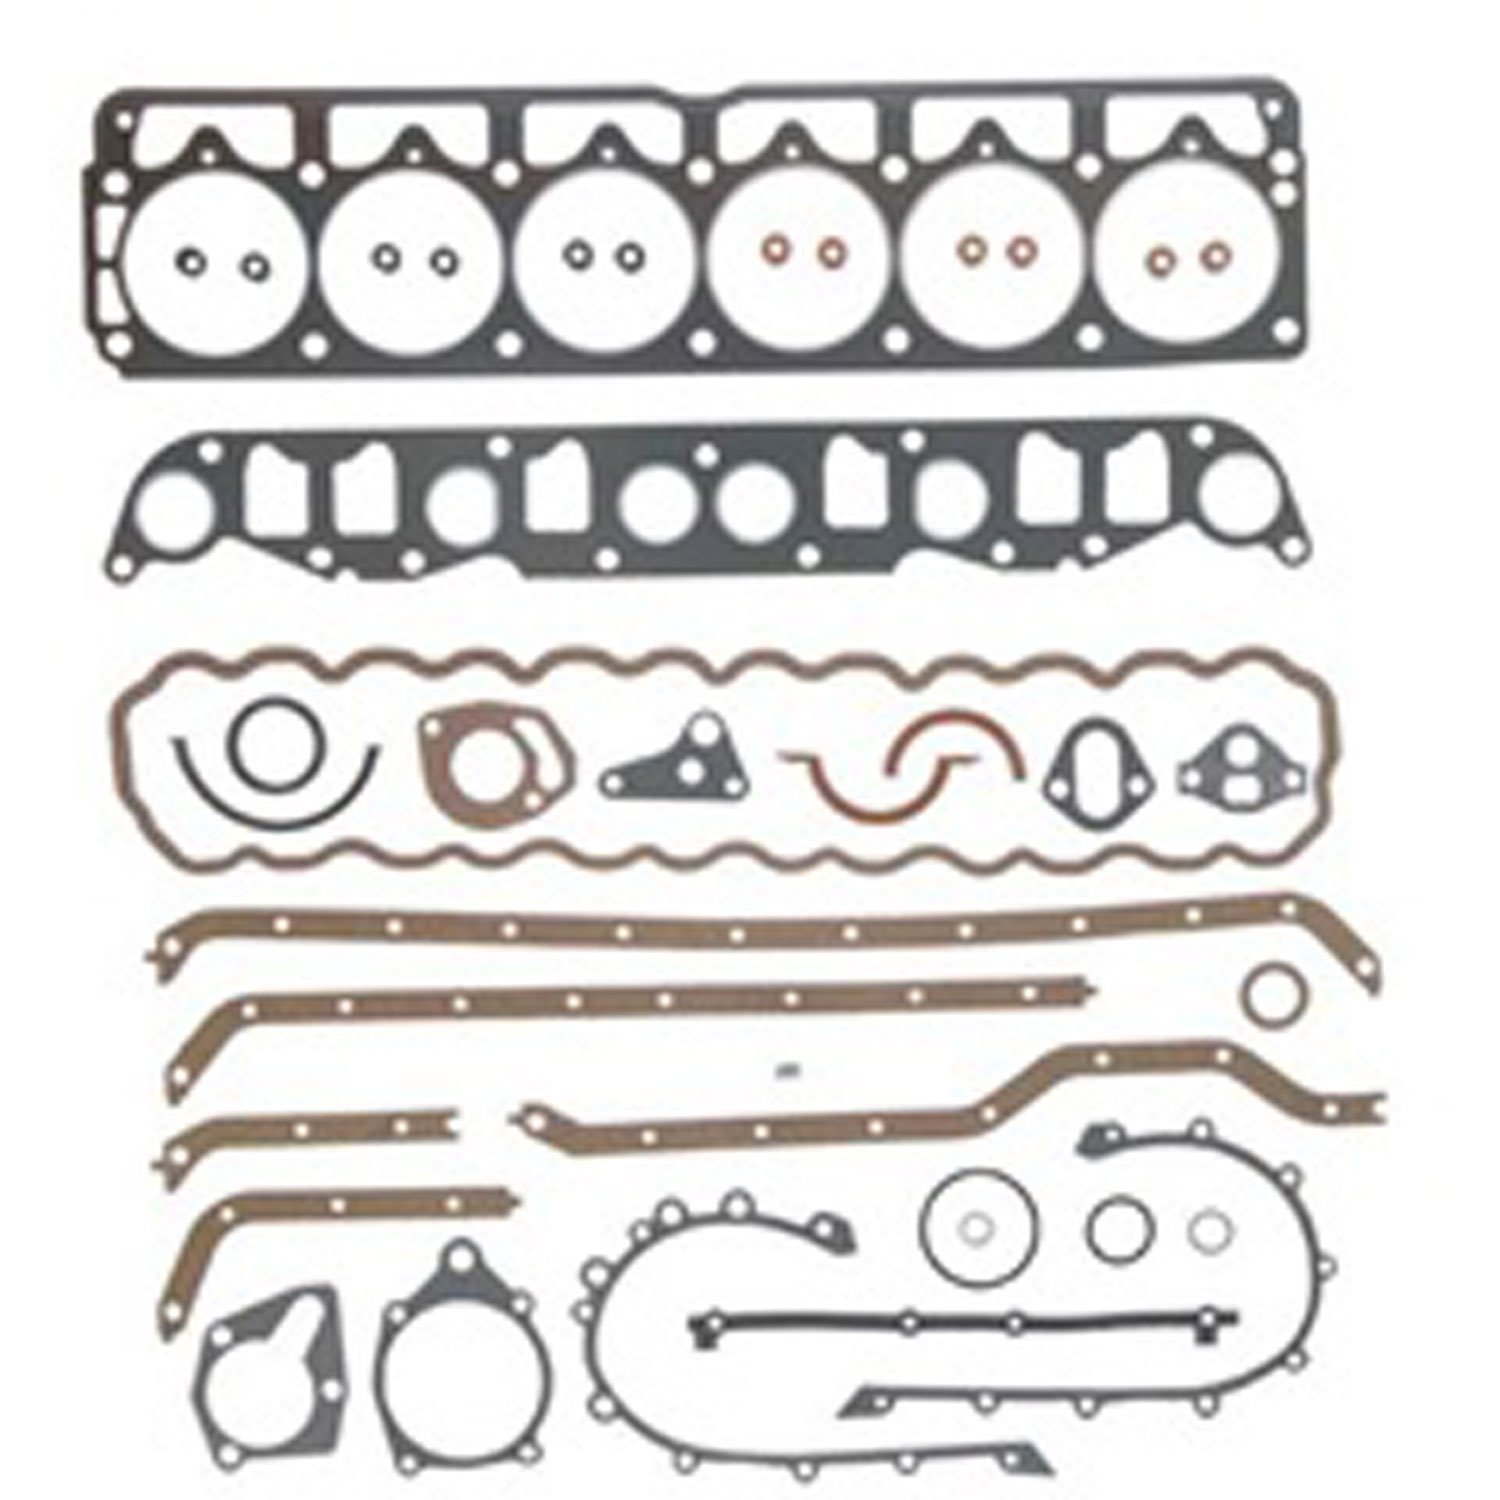 This full engine gasket set from Omix-ADA fits the 4.0L engine used in 1987-1990 Jeep Cherokees.